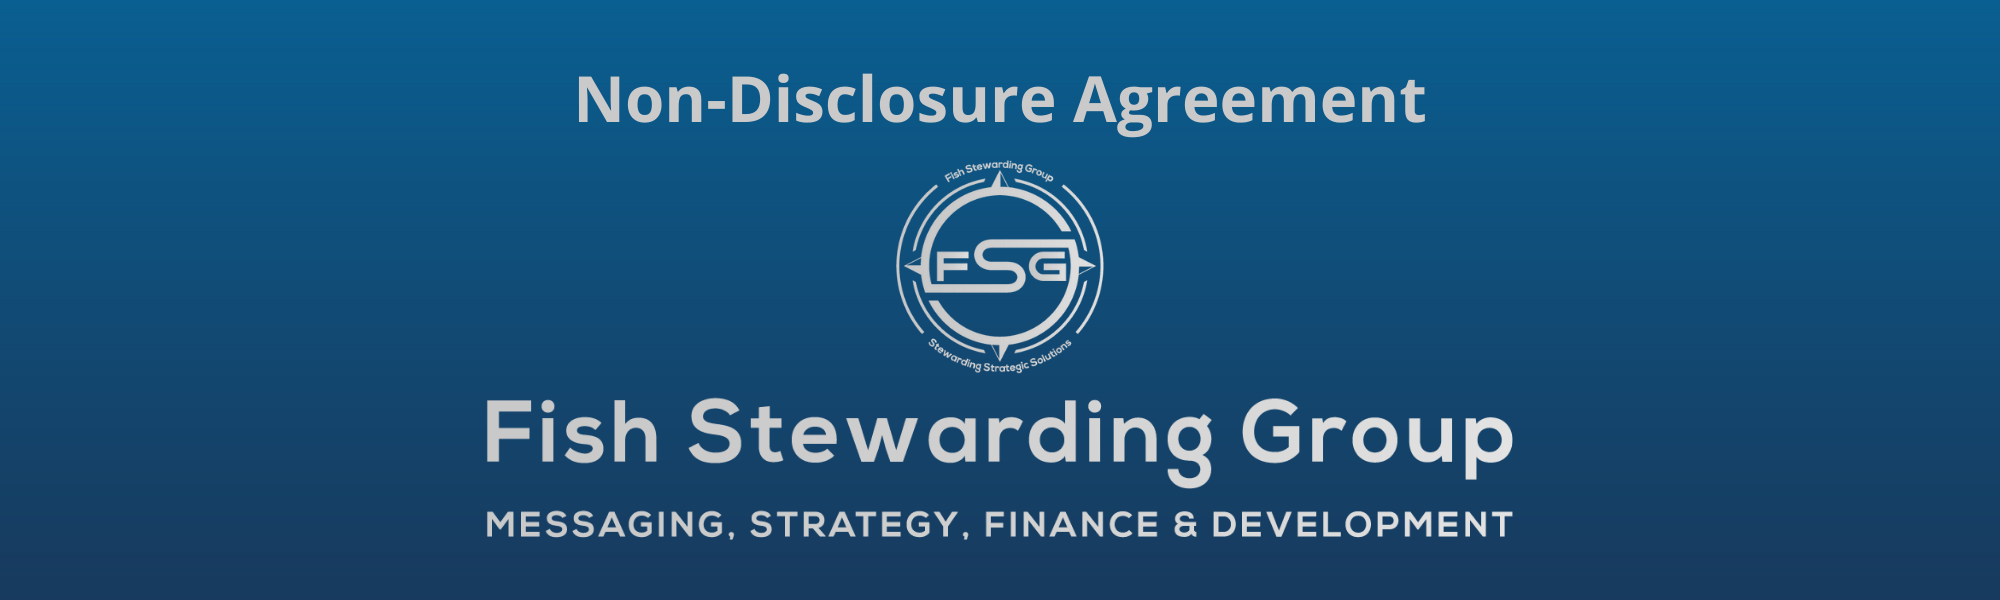 A thin rectangular Footer graphic for the Non-Disclosure Agreement page. The background is a blue gradient color that goes from a dark blue on the bottom to a lighter blue on top. The text in gray on top reads Non-Disclosure Agreement. The text in gray on the bottom center reads: Fish Stewarding Group and beneath that, the text reads Messaging, Strategy, Finance and Development. In the center above the text is the FSG logo in gray. The logo has the letters FSG in the middle with a circle with four pointed arrows facing north, south, east and west with the S connected to that circle. Four rounded lines make the next circle of the circle and the last layer is a thin circle with the text on the Bottom that reads Stewarding Strategist Solutions and on top, the text reads Fish Stewarding Group.